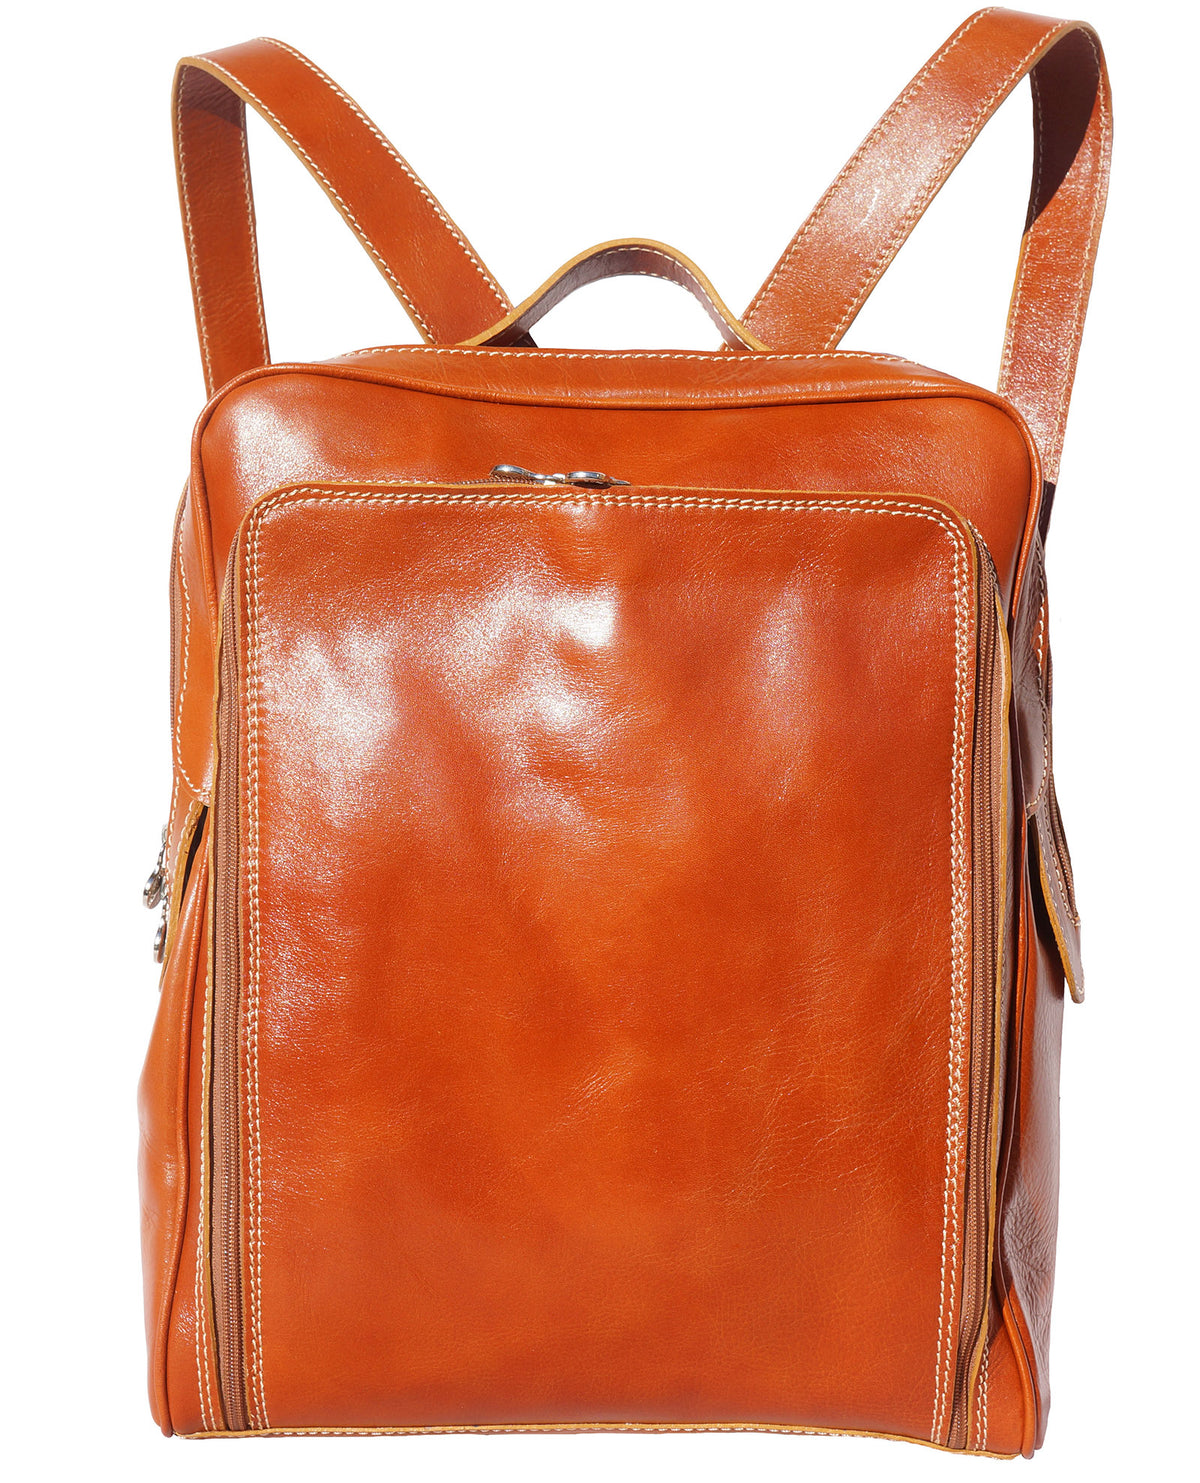 Gabriele GM Leather Backpack - Italian Calfskin. Stylish tan purse converts to a functional laptop backpack.